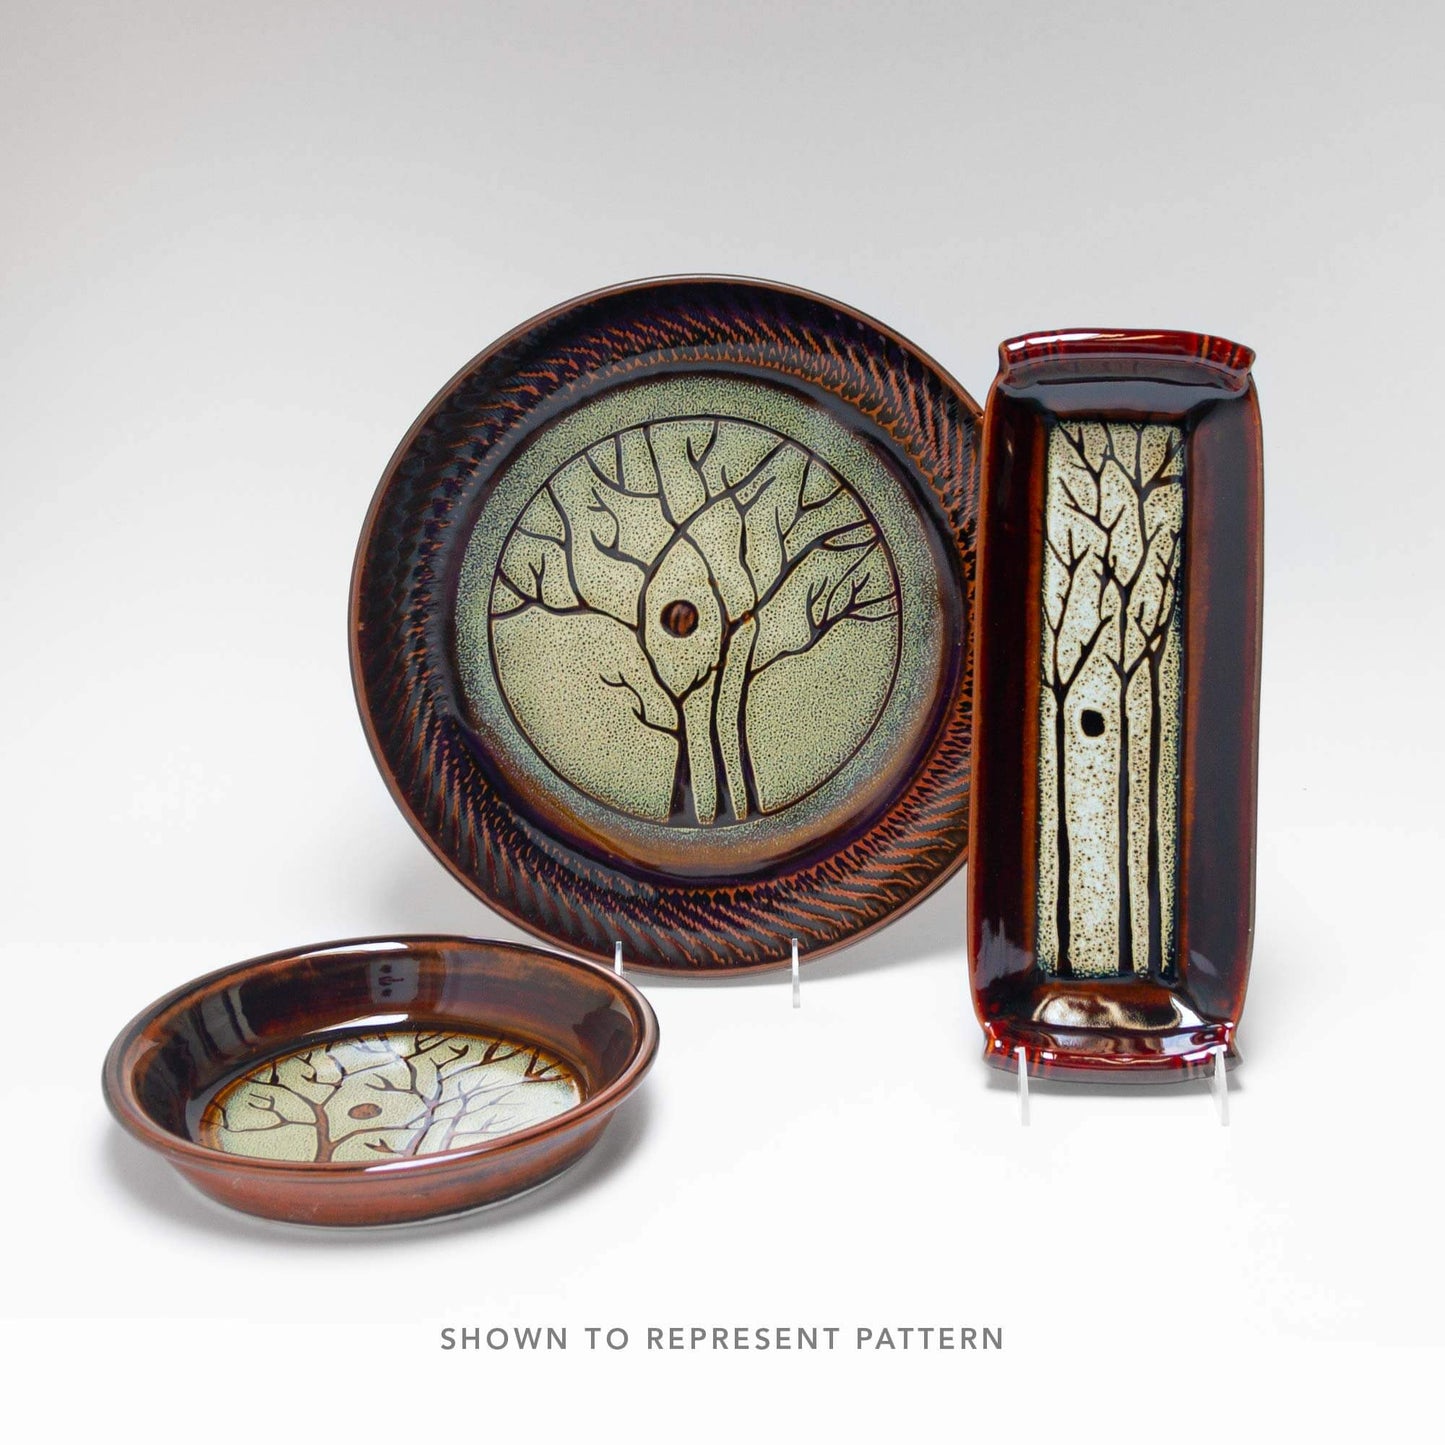 Handmade Pottery Small Clock w/ Stand in Hamada Tree pattern made by Georgetown Pottery in Maine